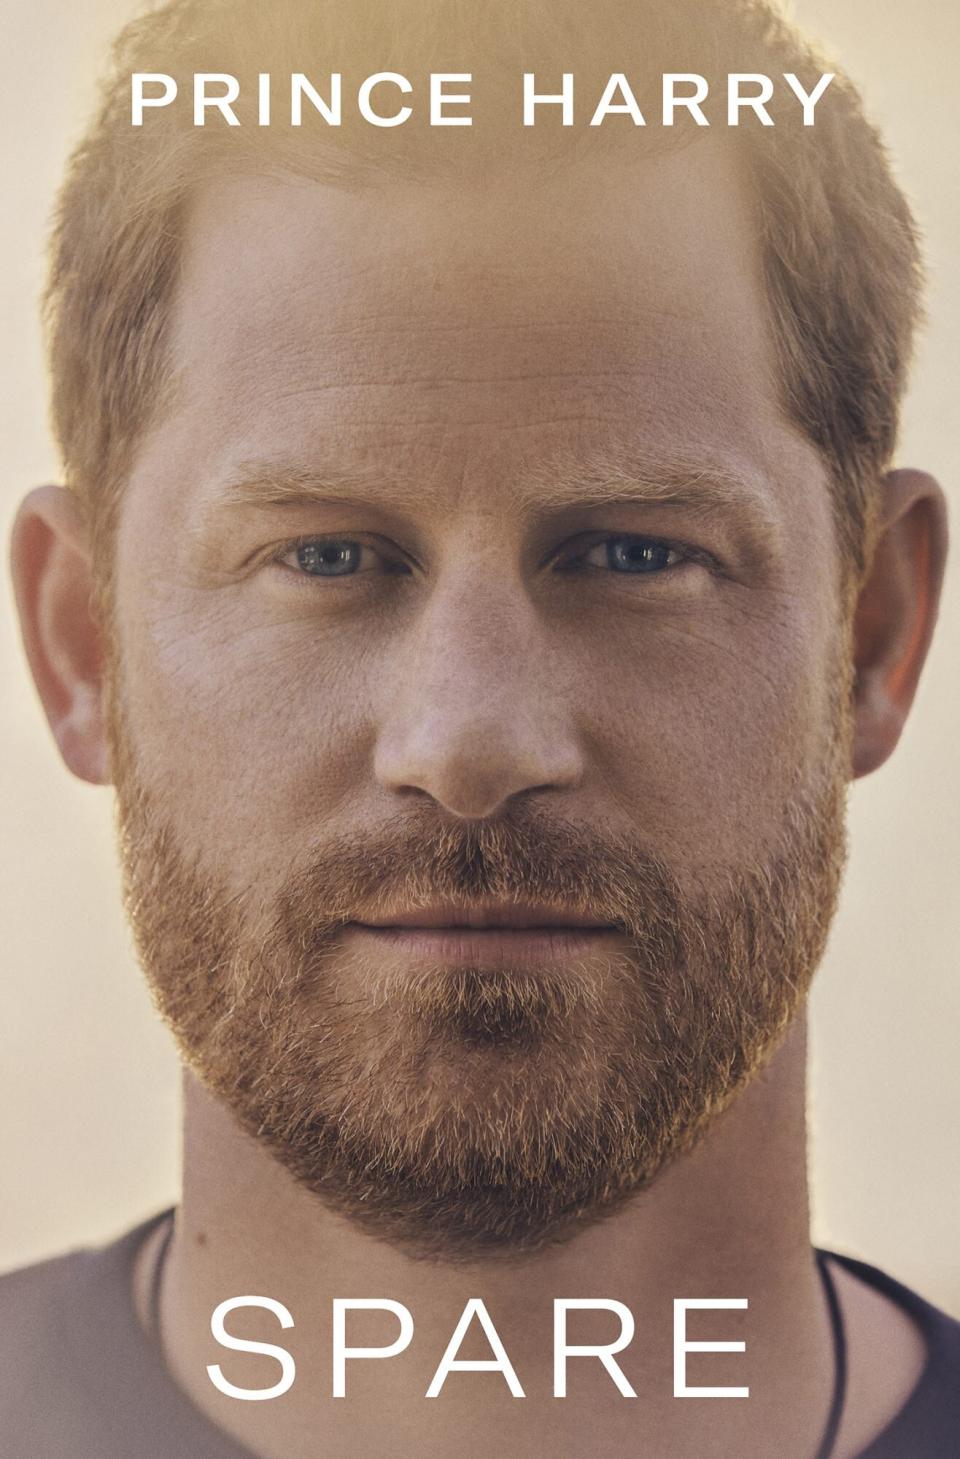 SPARE, THE HIGHLY ANTICIPATED MEMOIR OF PRINCE HARRY, THE DUKE OF SUSSEX, TO BE PUBLISHED GLOBALLY ON JANUARY 10, 2023, BY PENGUIN RANDOM HOUSE